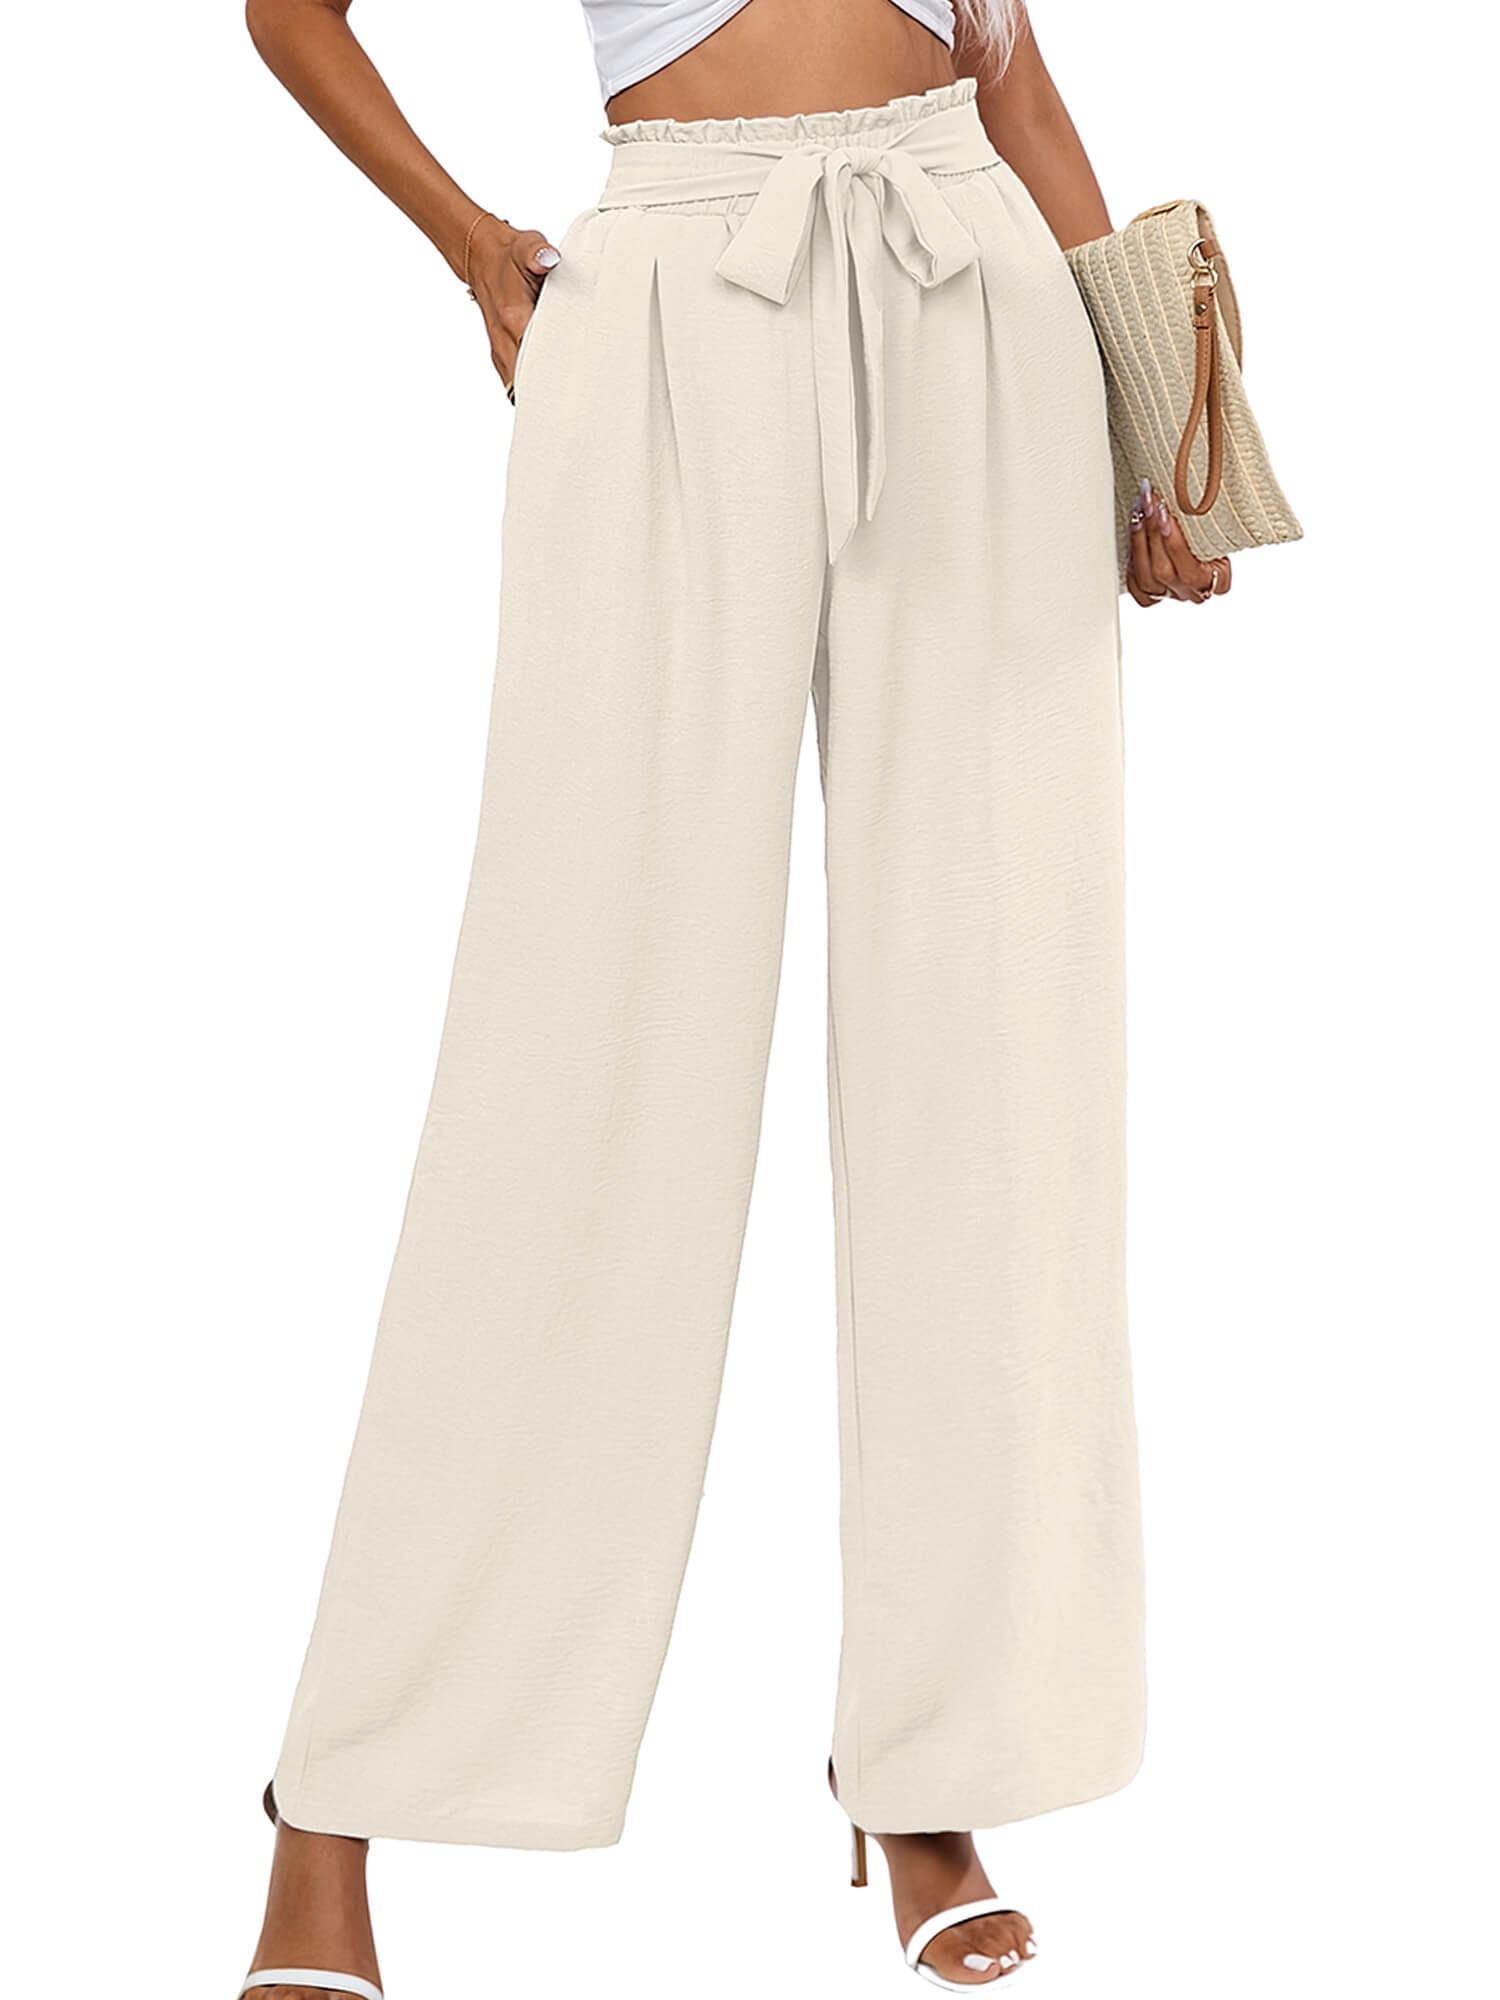 Flamboyant Natural Women's Wide Leg Pants with Pockets